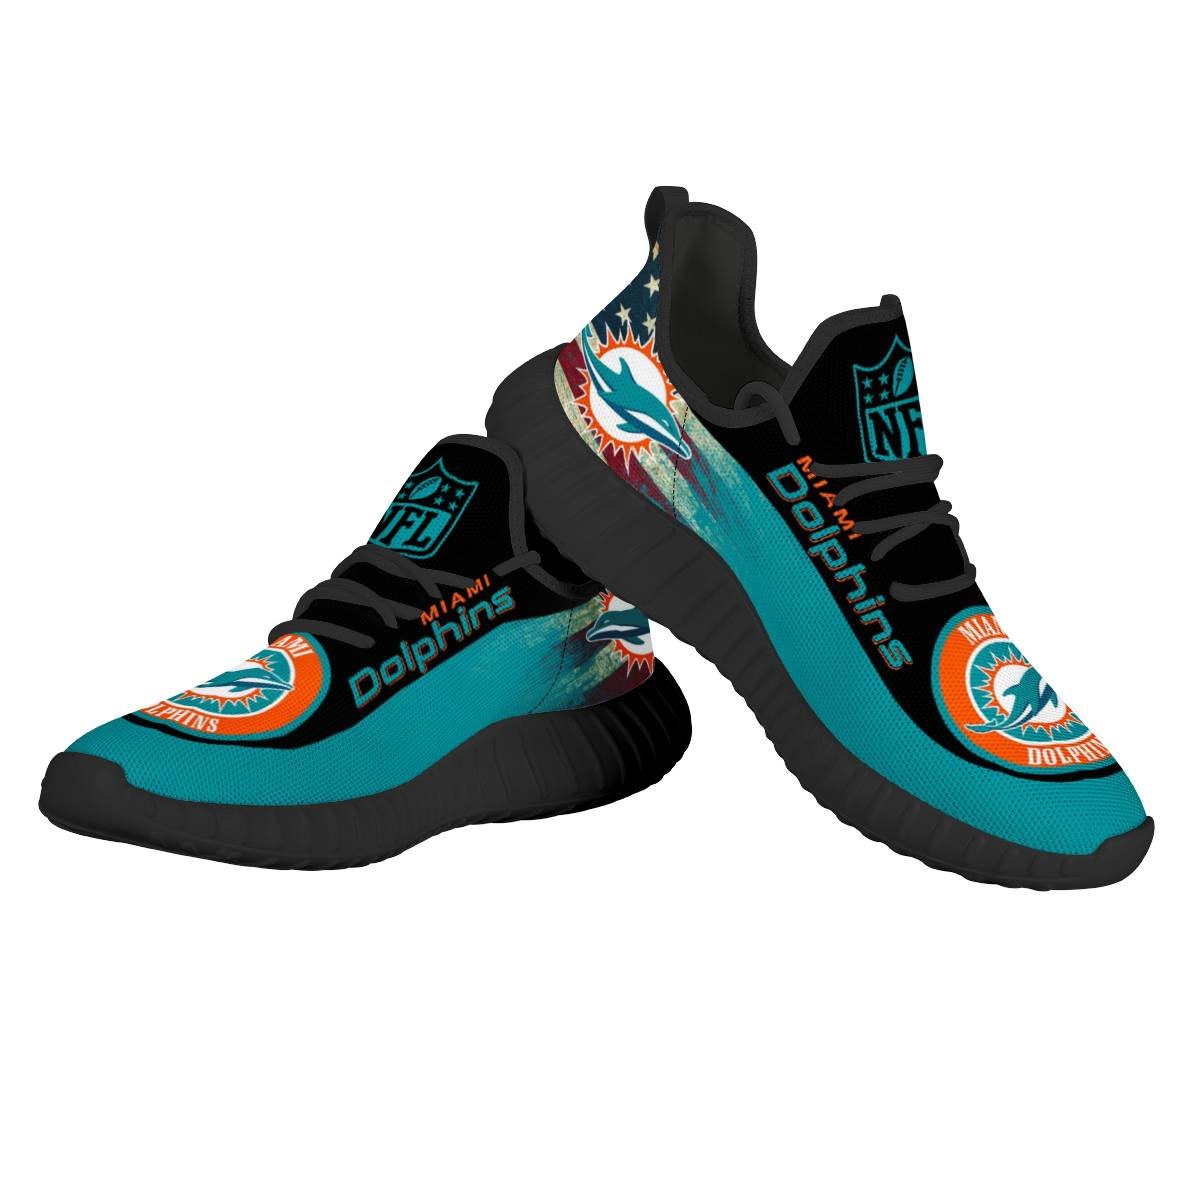 Women's NFL Miami Dolphins Mesh Knit Sneakers/Shoes 004